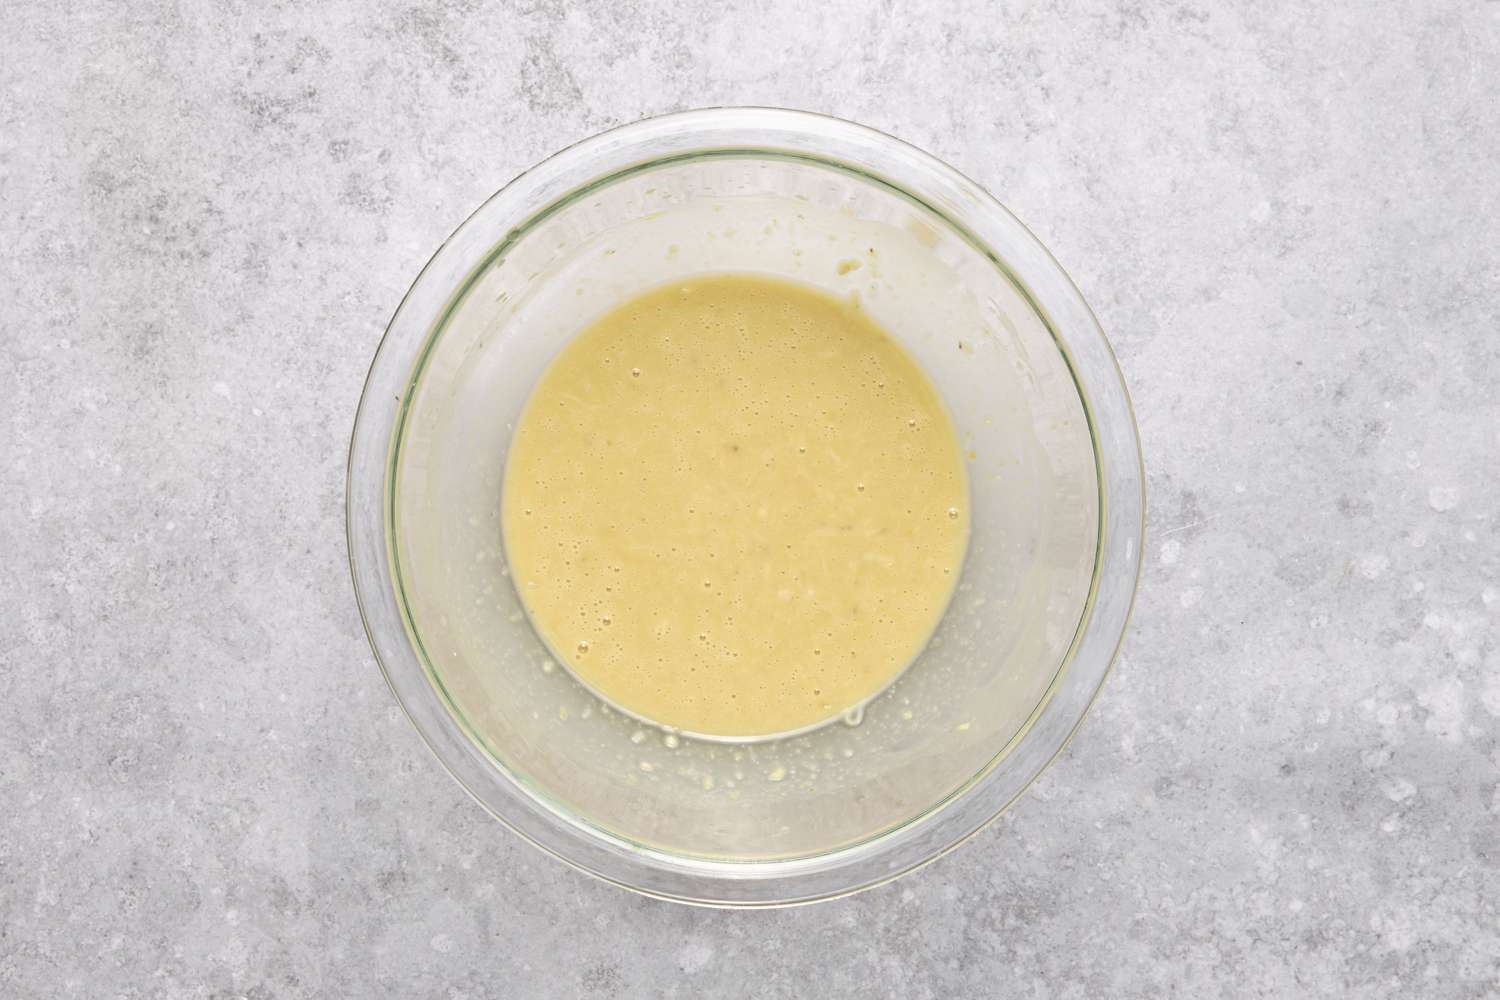 A bowl of dressing made from olive oil, grated Parmigiano-Reggiano, and the lemon-egg yolk mixture